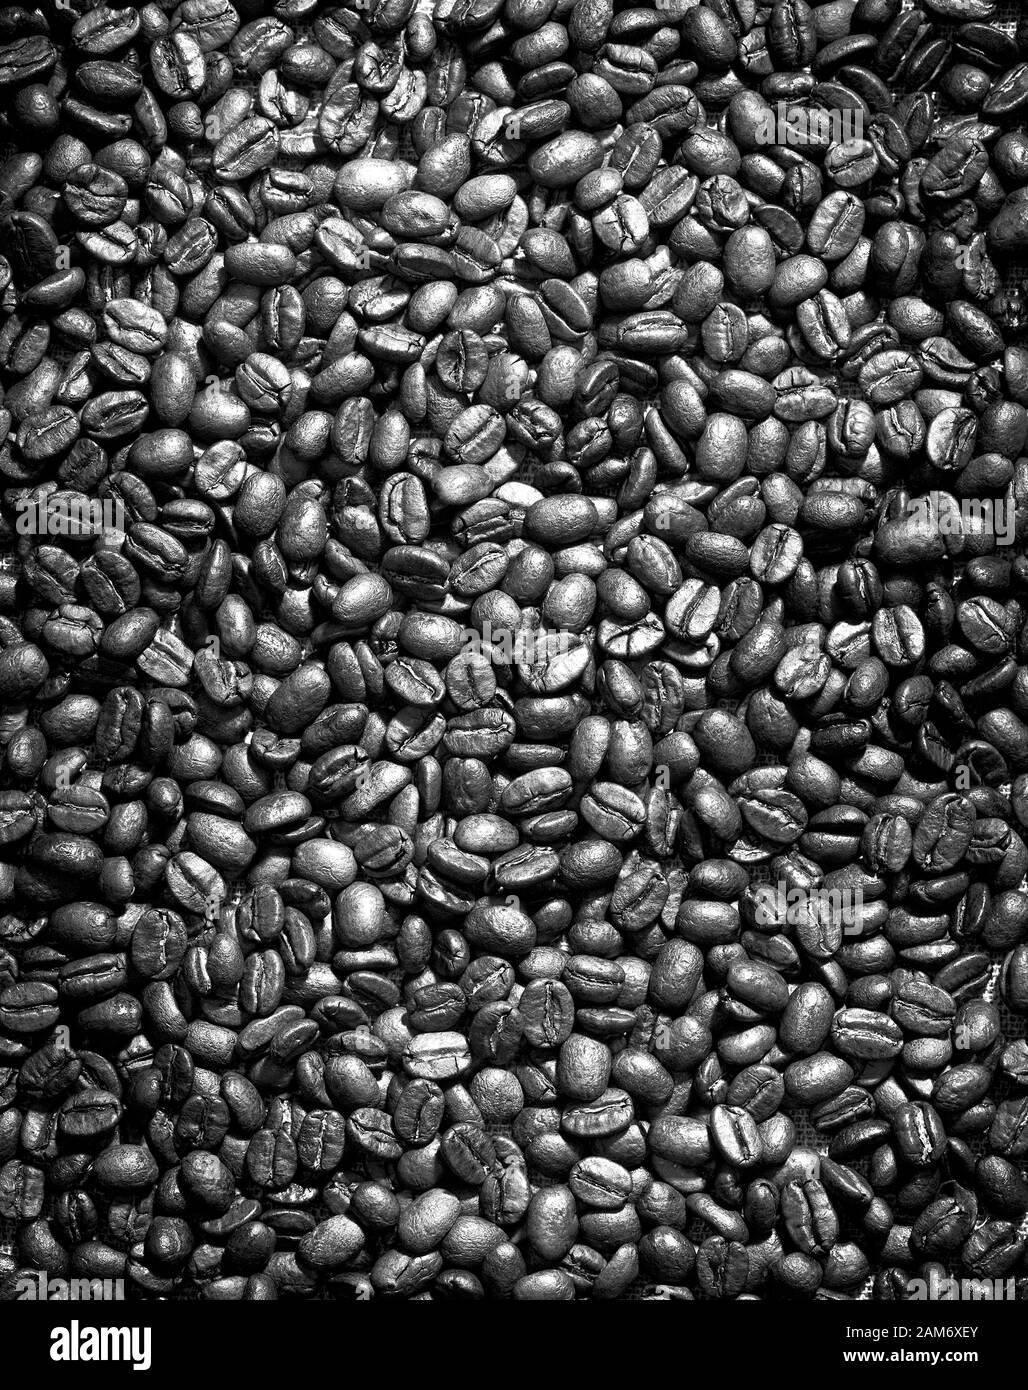 Coffee bean art Black and White Stock Photos & Images - Alamy